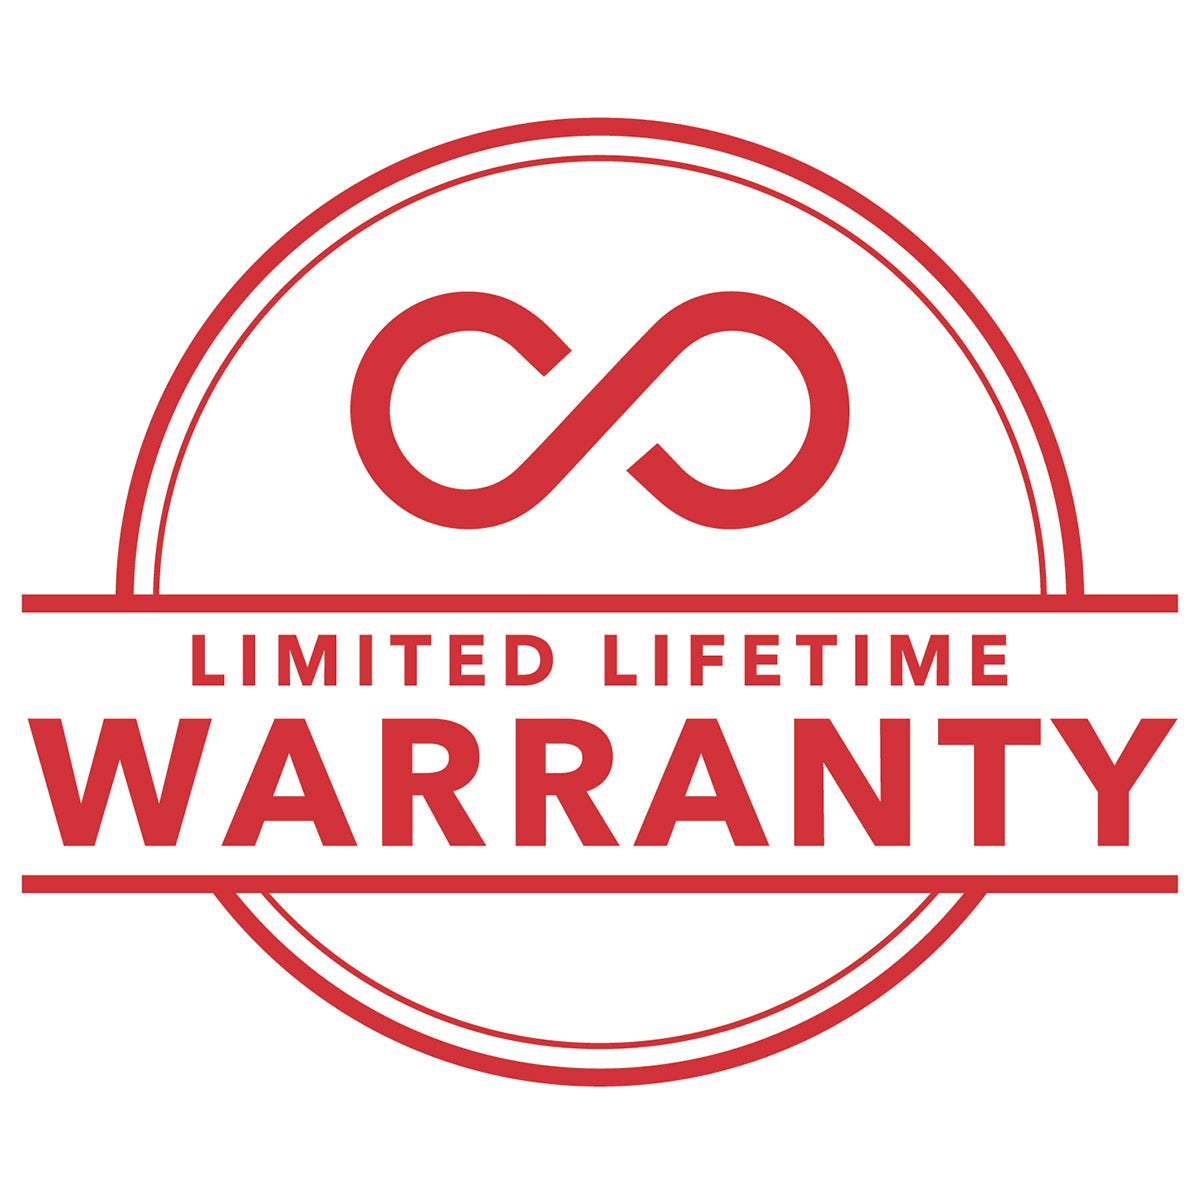 Limited Lifetime Warranty
||If your GlassFusion camera lens protectors ever get worn or damaged, we will replace them for the life of your device. 
